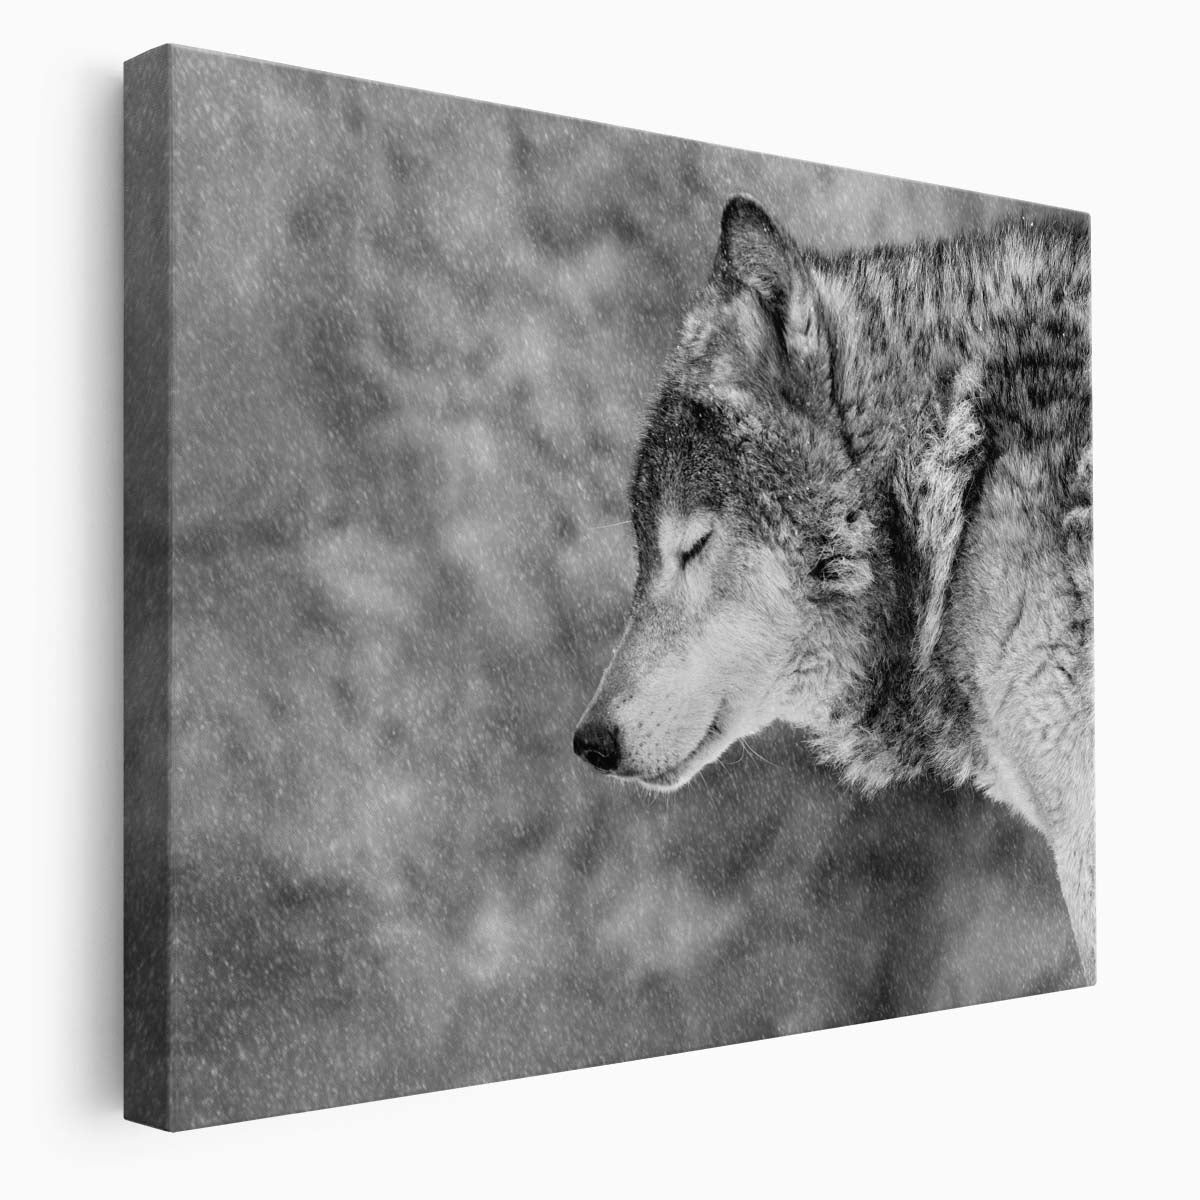 Serene Snow Wolf in Blissful Winter Wall Art by Luxuriance Designs. Made in USA.